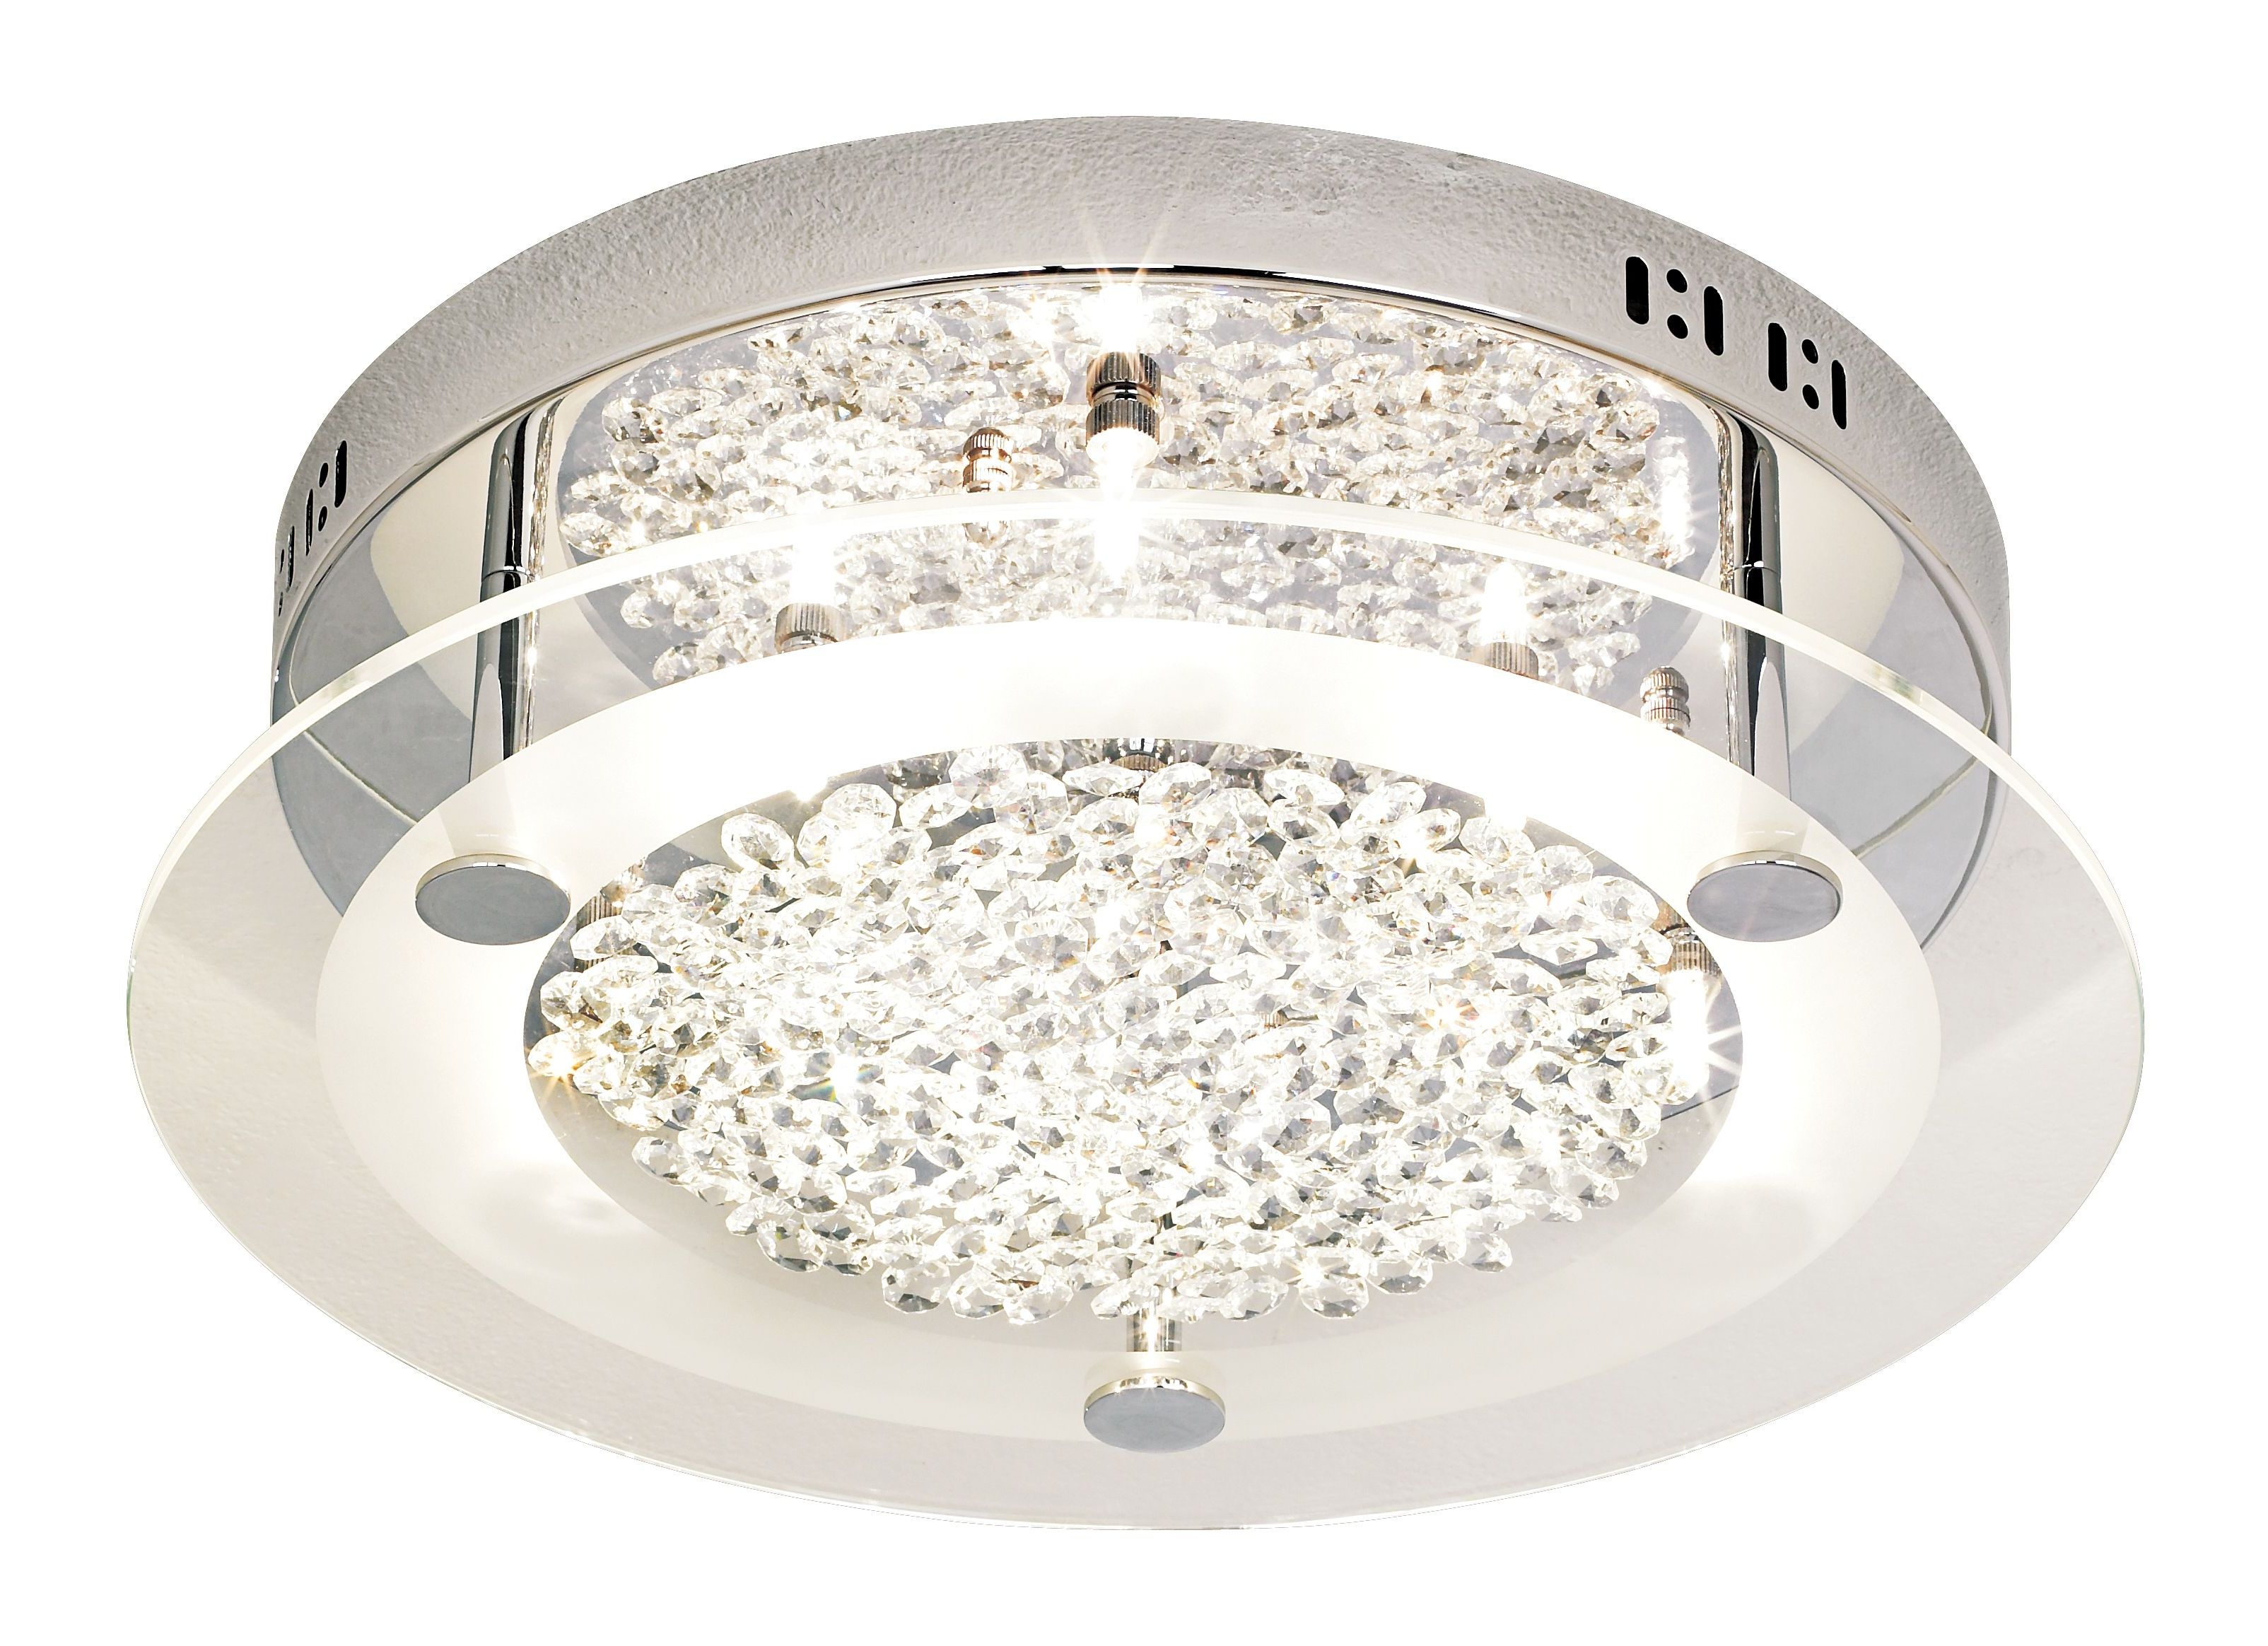 Permalink to Bathroom Ceiling Light Fixtures With Fan